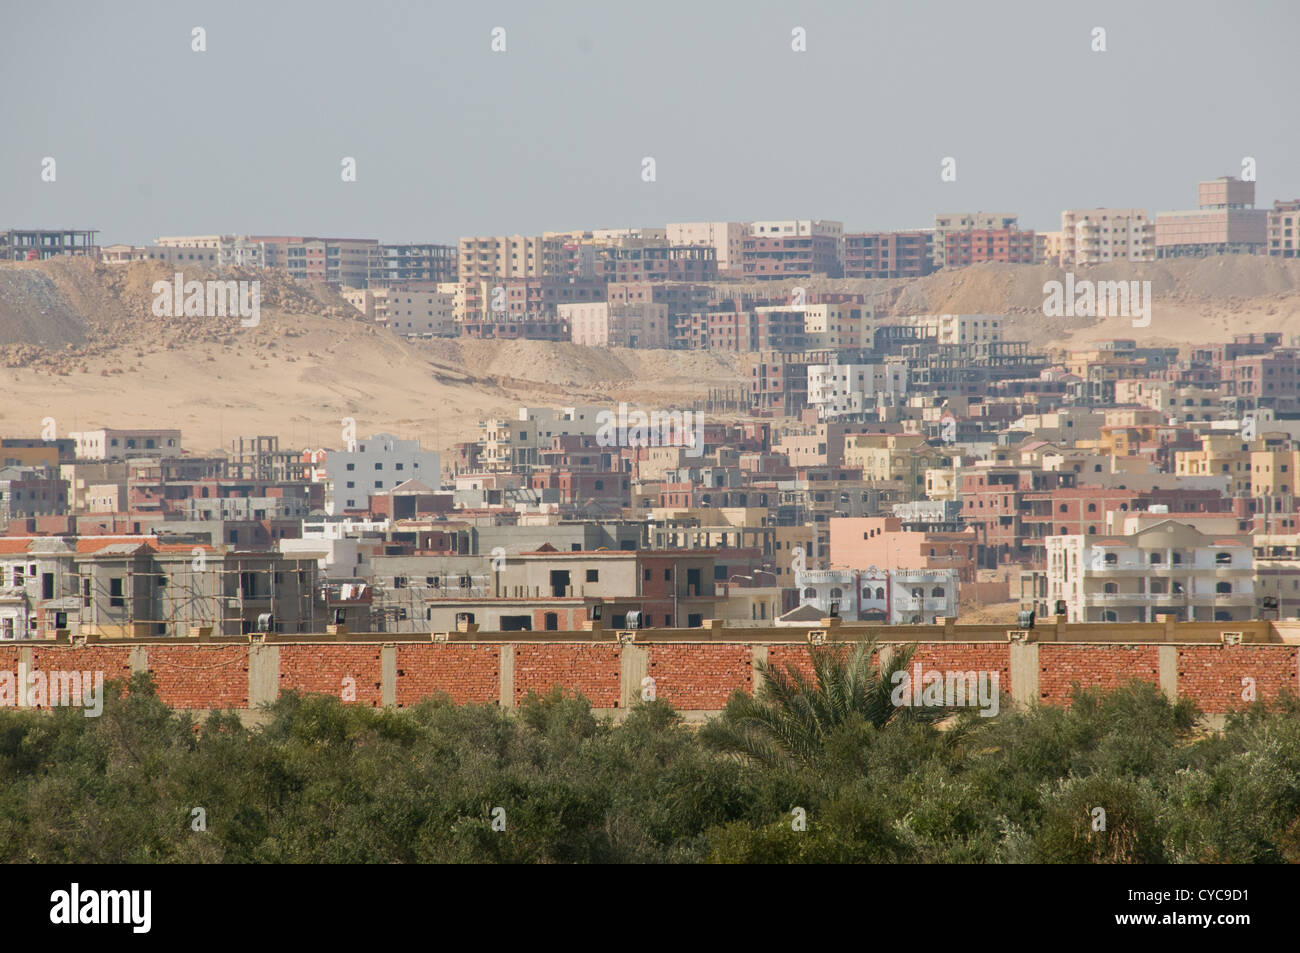 New residential developments encroaching on the desert in Cairo Suburbs close to Airport, Egypt Stock Photo